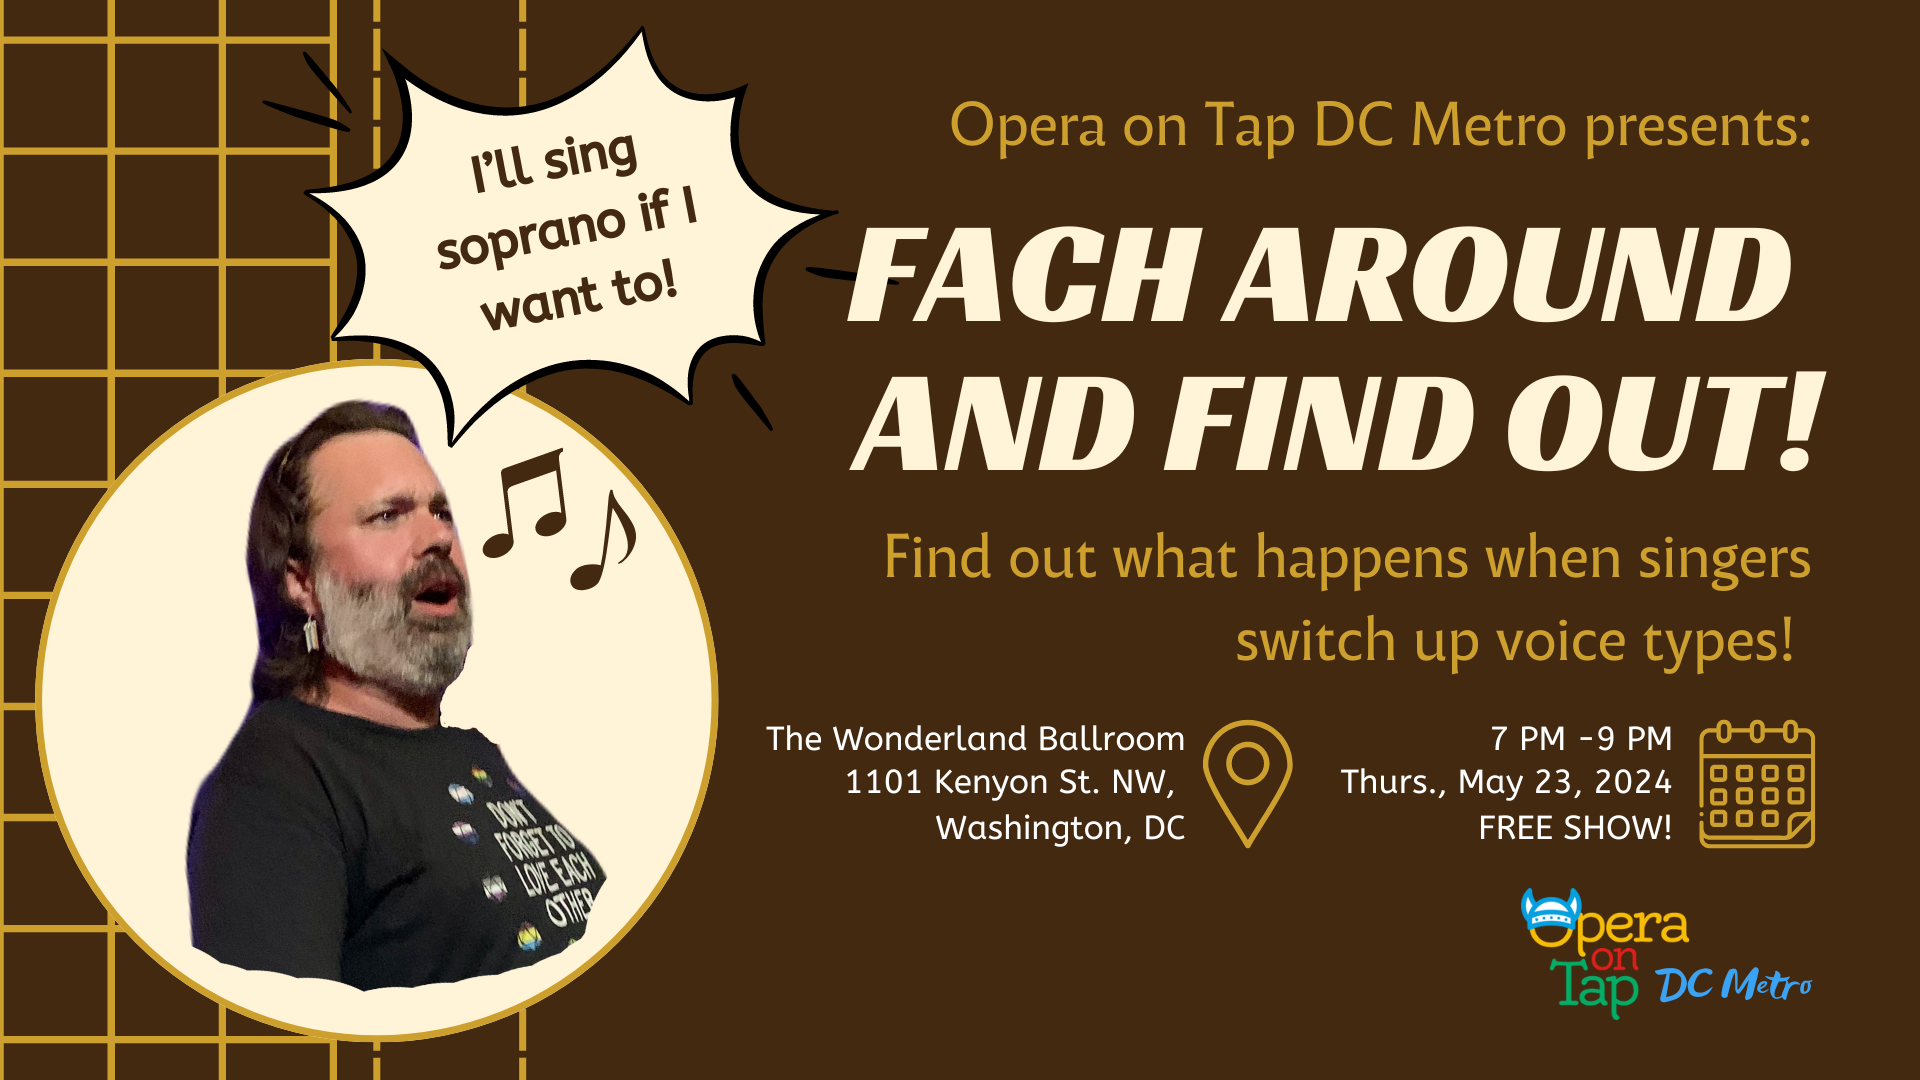 Opera on Tap DC Metro presents: Fach Around and Find Out!